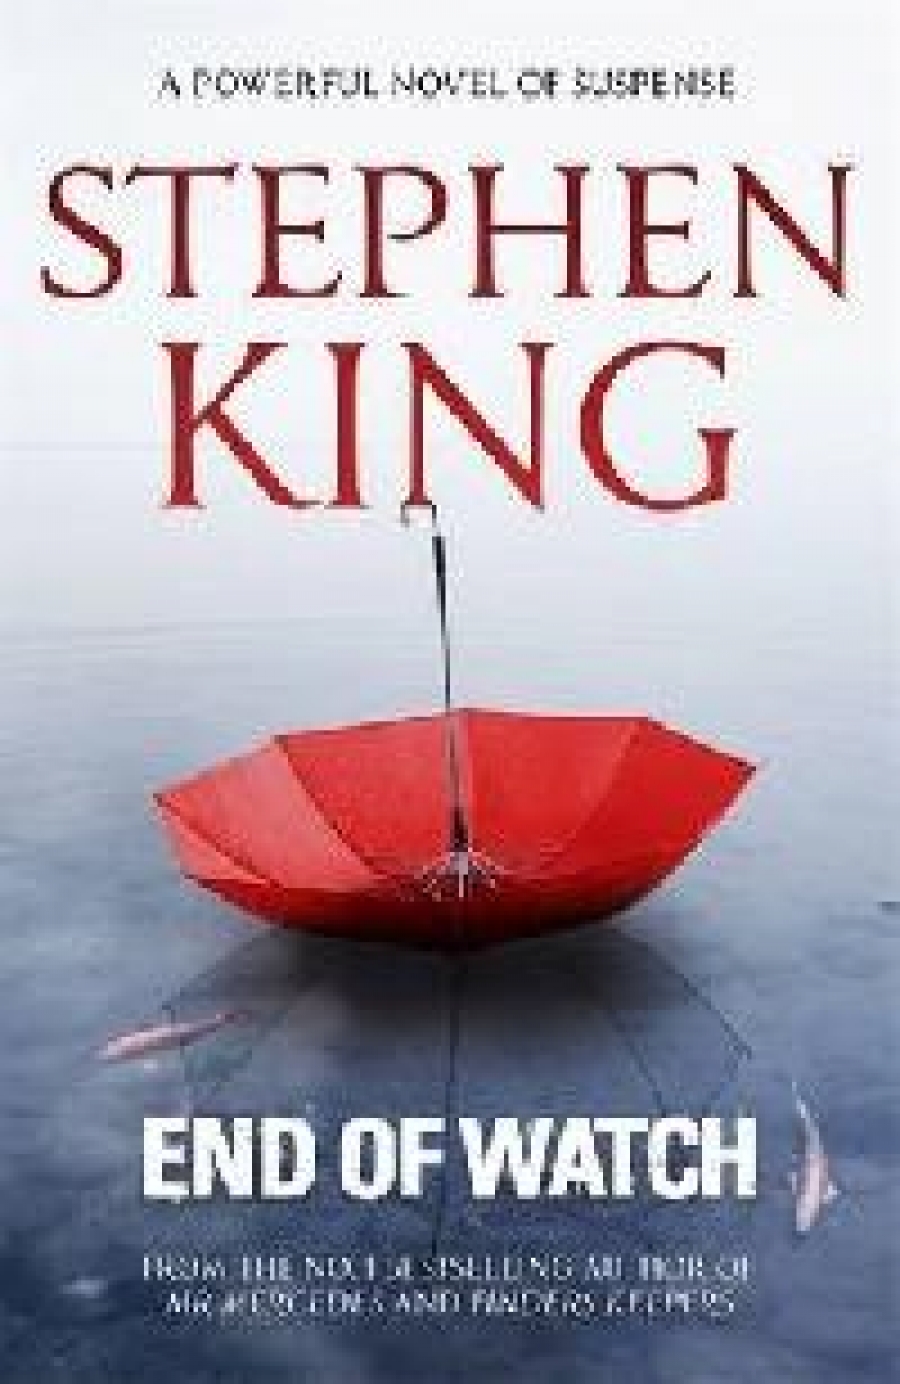 King Stephen End of Watch 